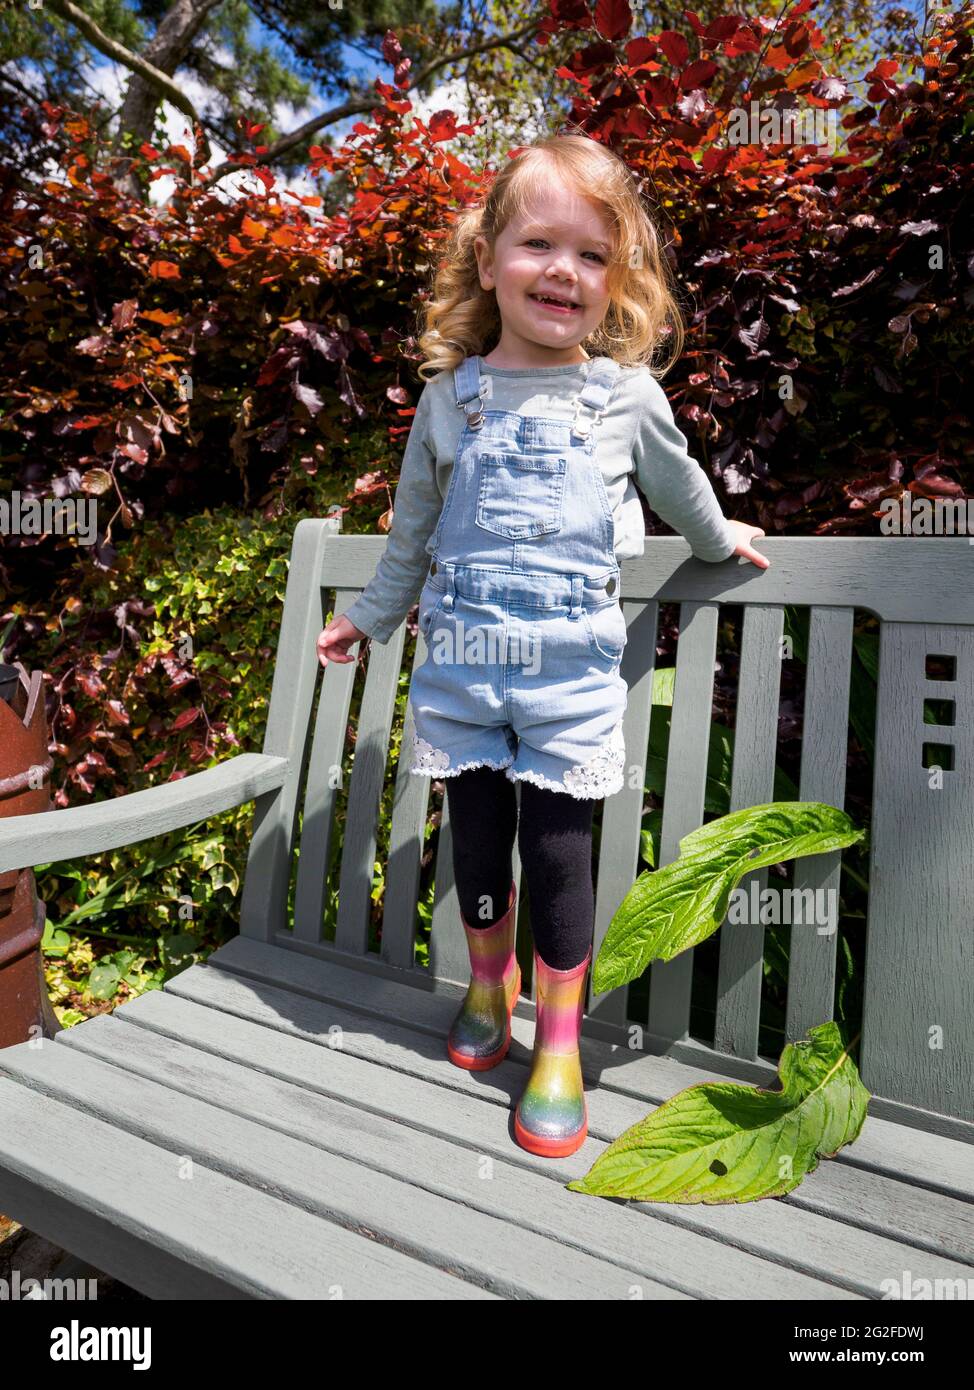 Three year old standing on a bench in the garden, Devon, UK Stock Photo